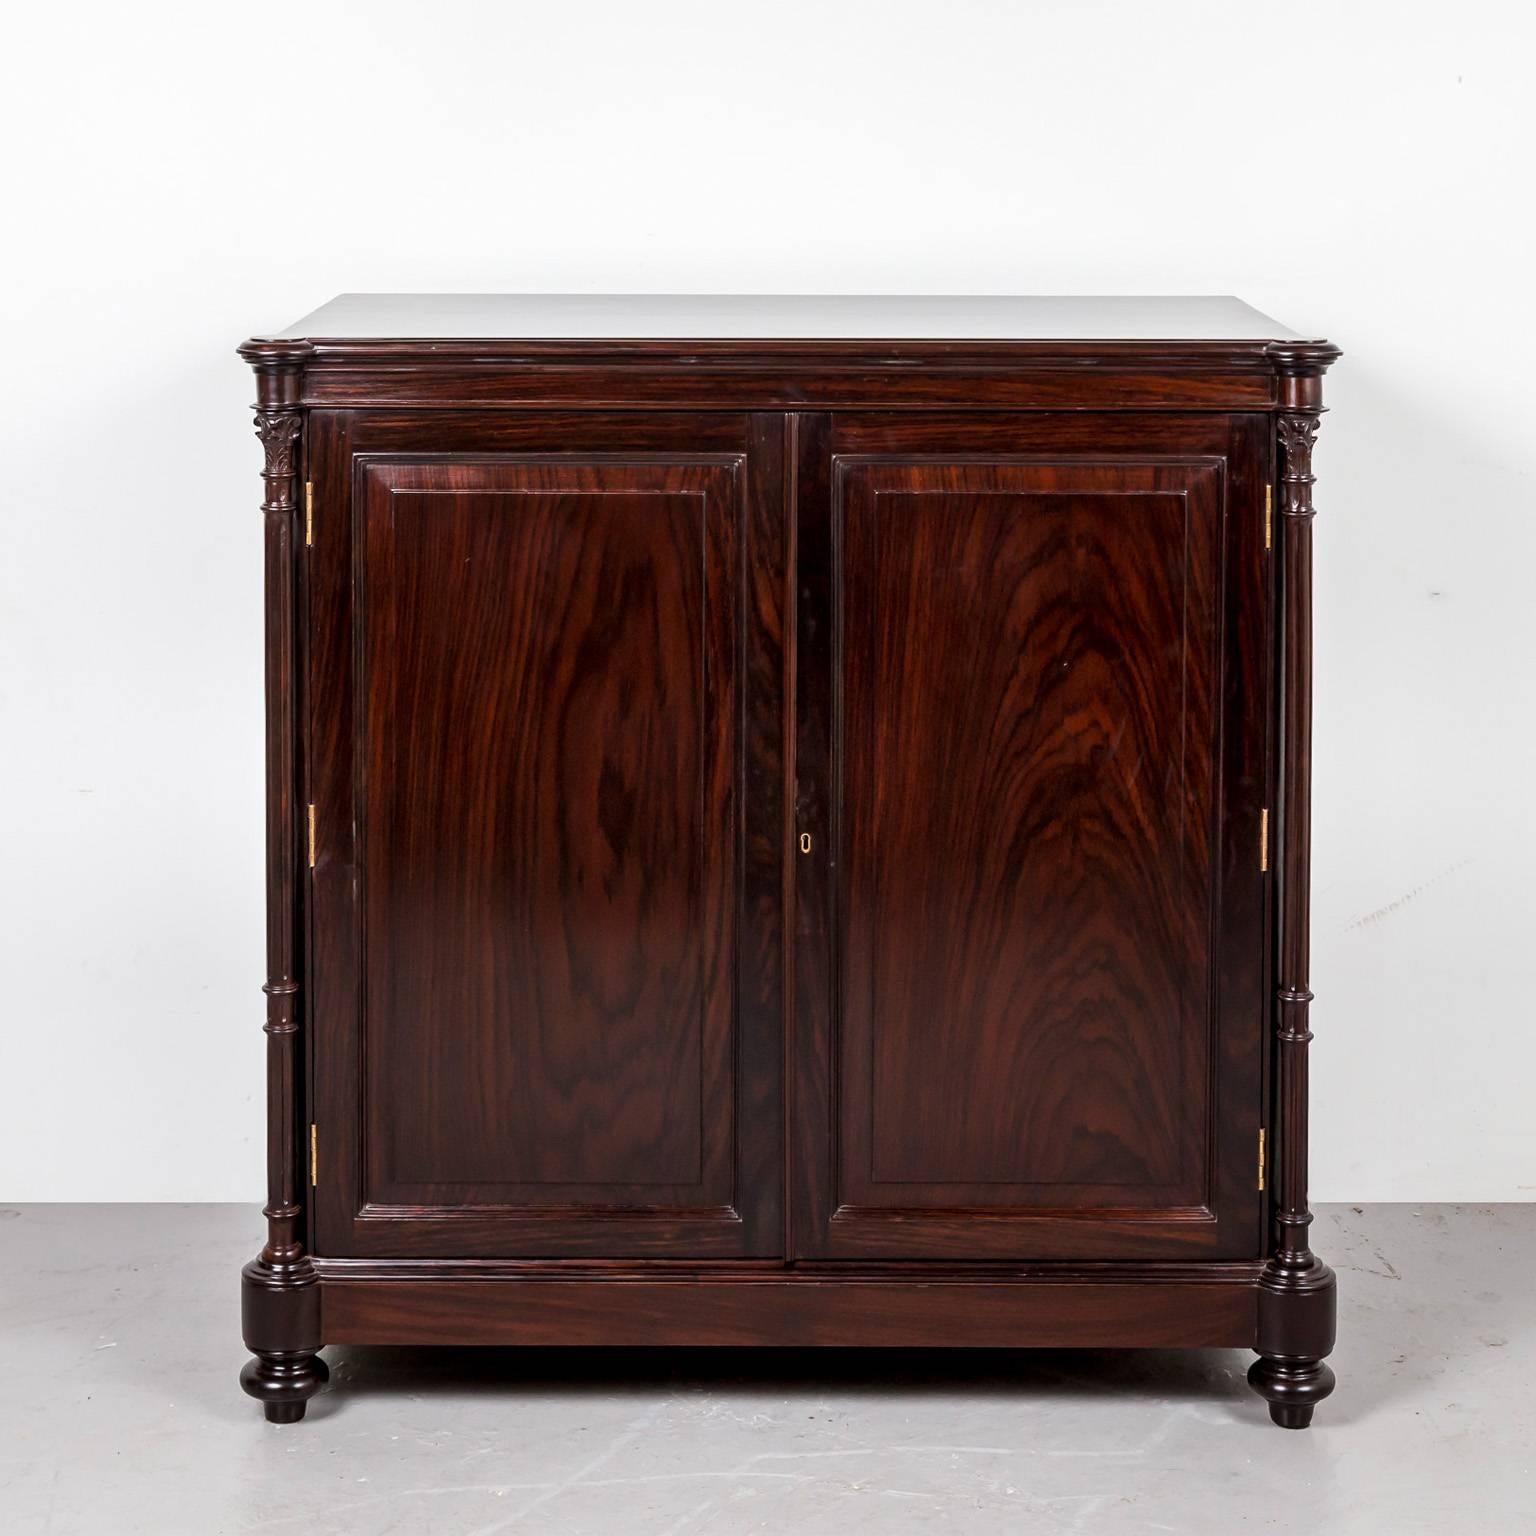 A British Colonial sideboard made of beautifully grained rosewood. The overhanging top is made of one piece of rosewood with rounded corners at the front. The double doors, which are constructed with fielded panels, are flanked by two carved solid